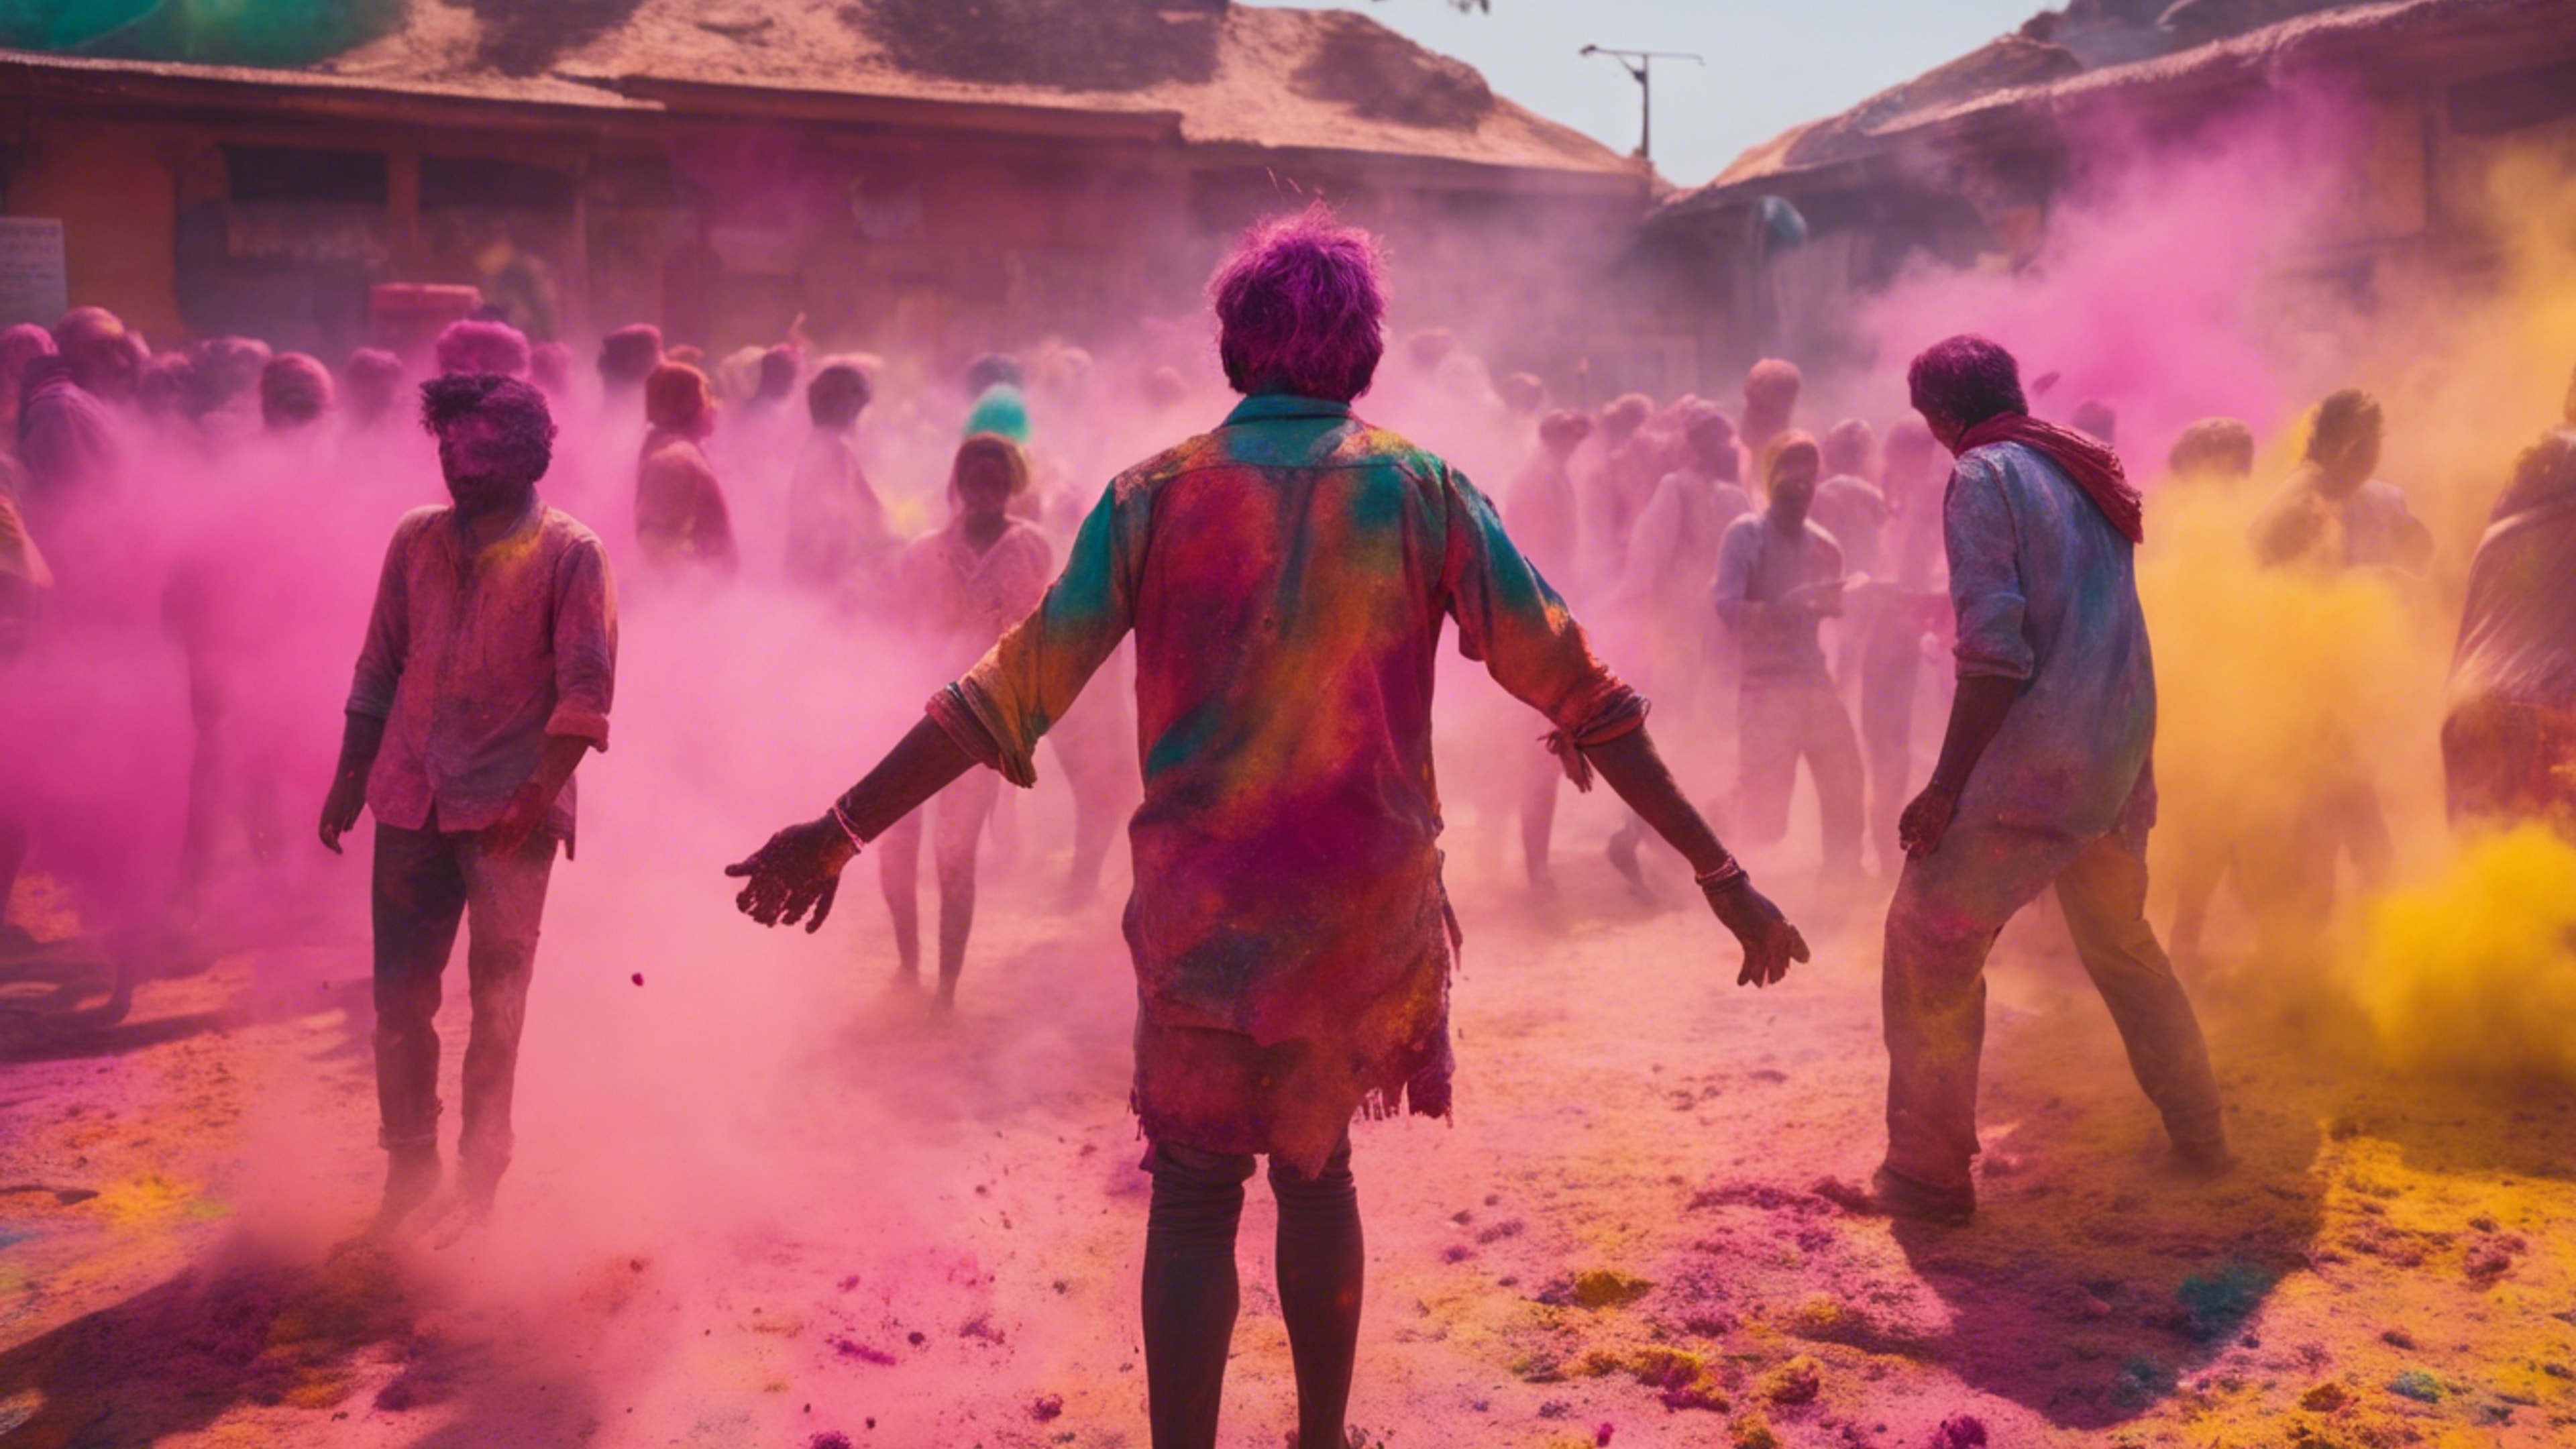 A vibrant and colorful Holi festival with people throwing powdered colors and laughing in the backdrop of an old Indian city. Papel de parede[6dae05cbdf264a67bd16]